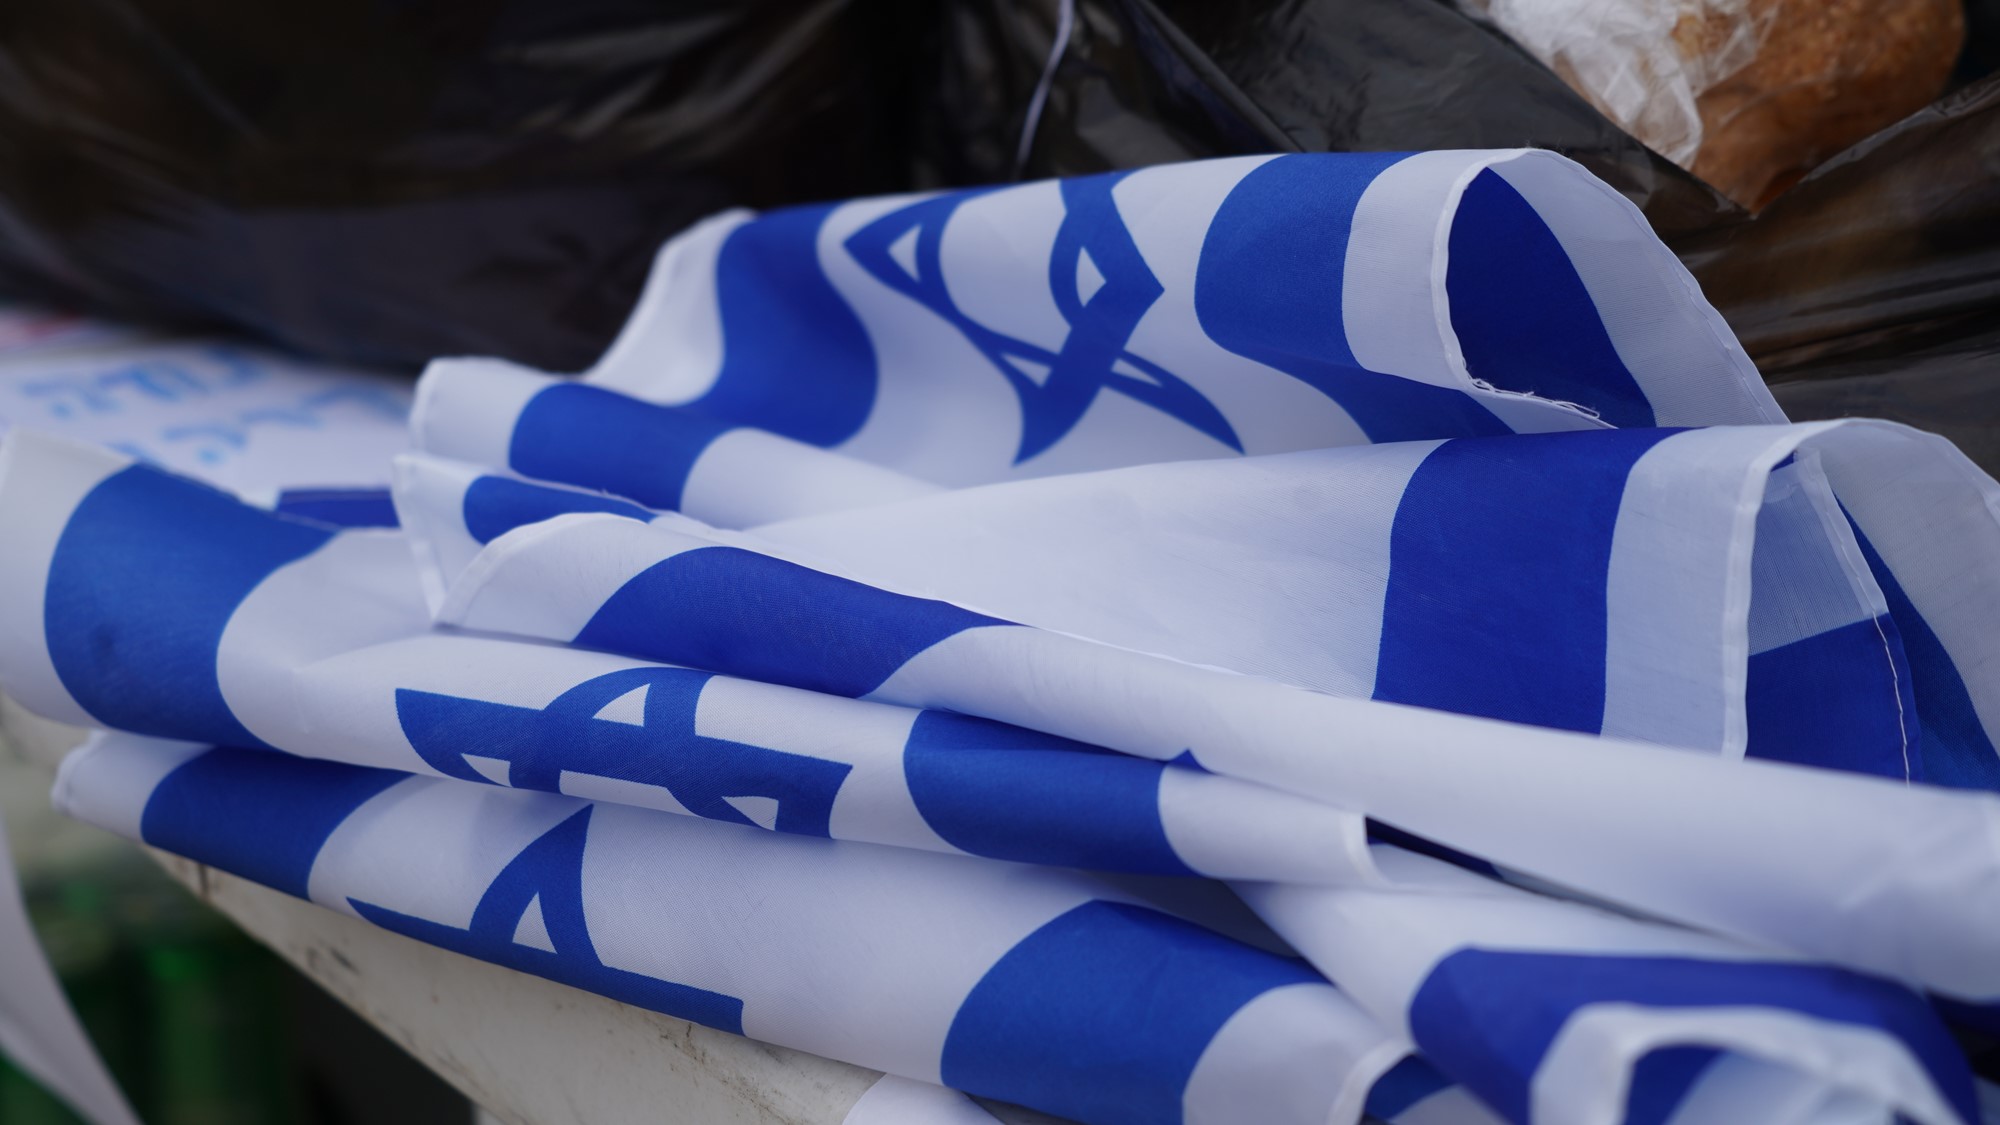 A pile of Israeli flags on a table